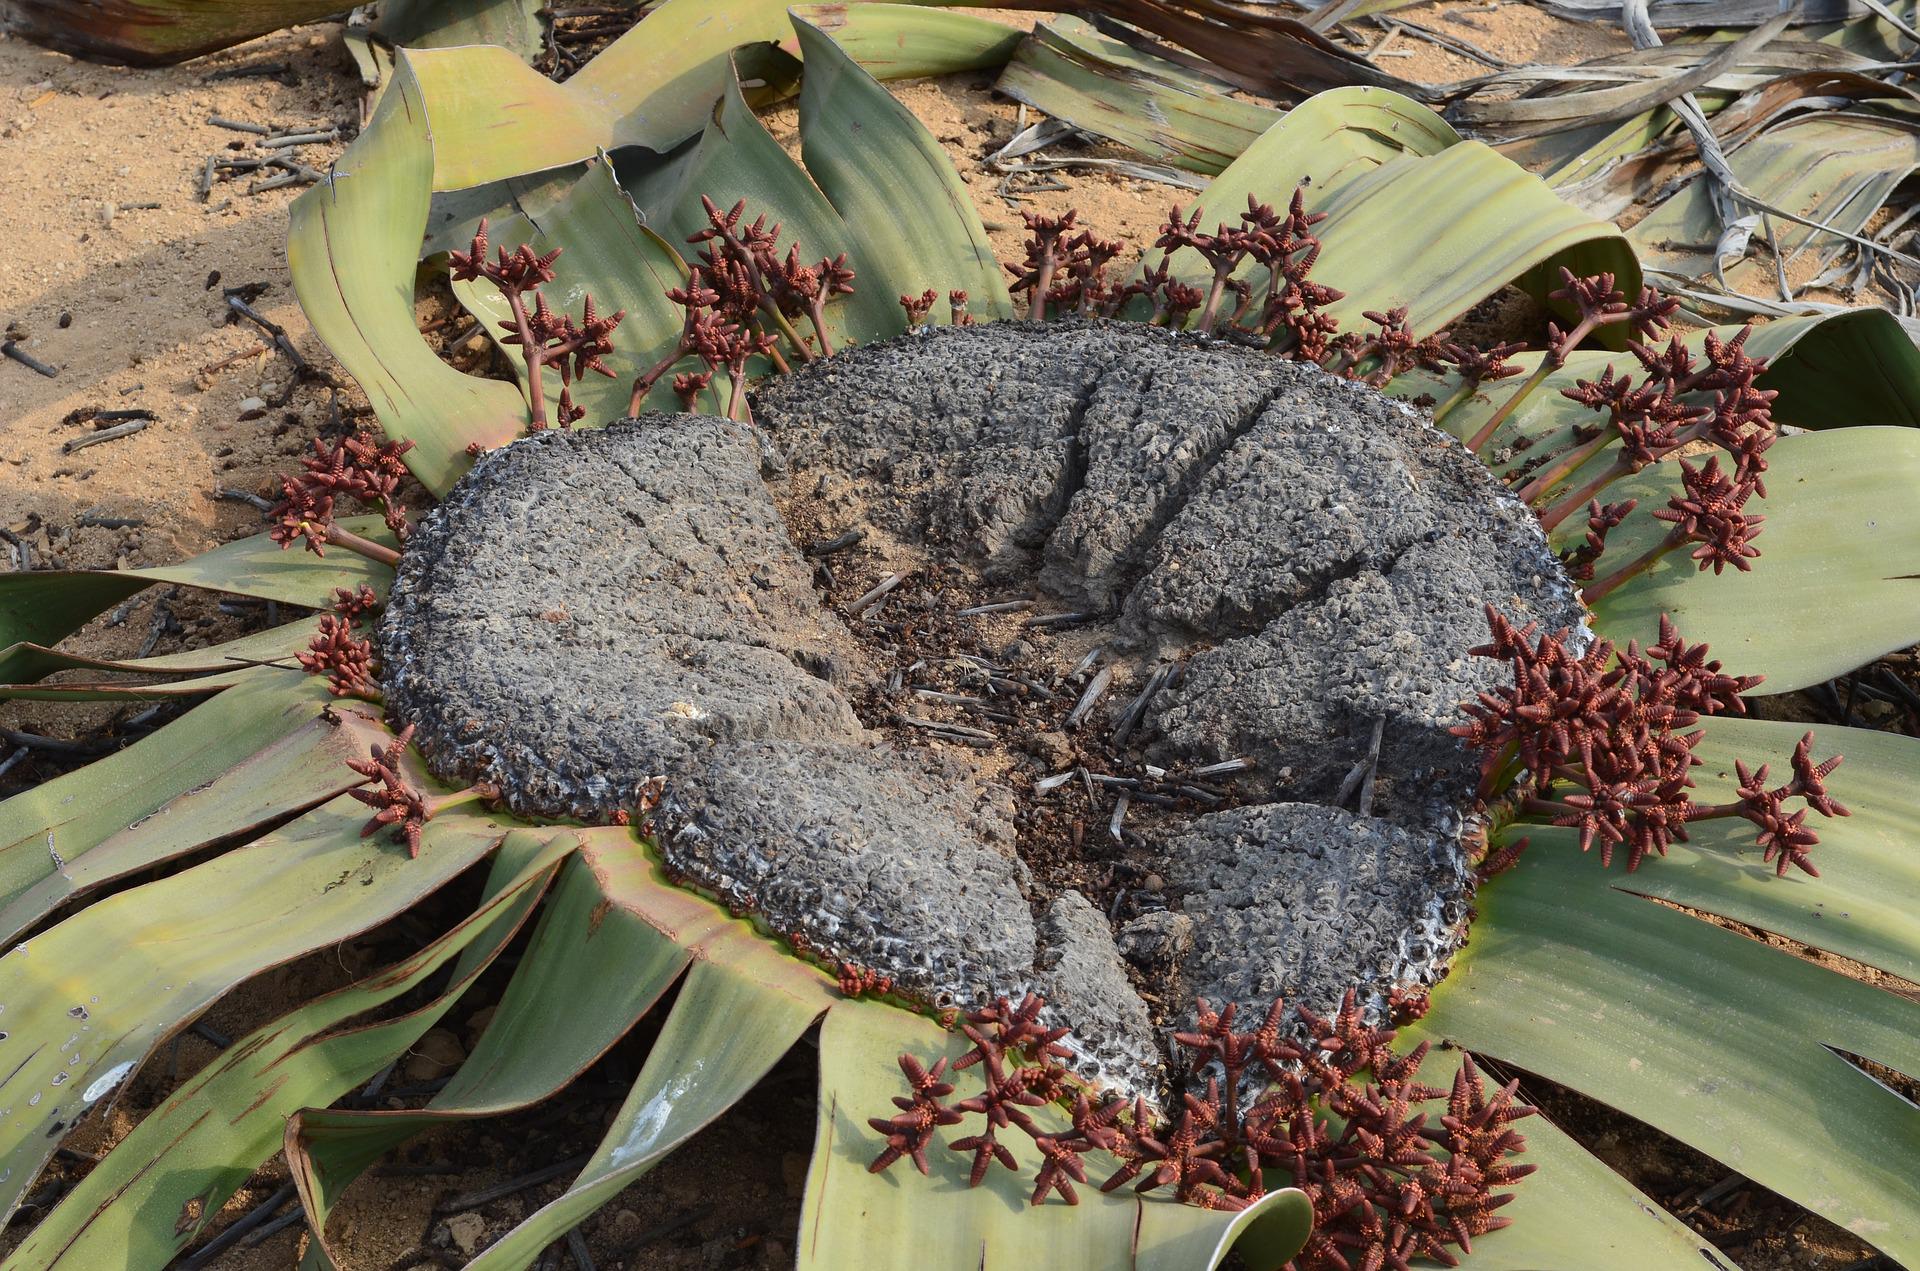 The Welwitschia mirabilis plant only grows in the Namib Desert of Namibia and in southern Angola.